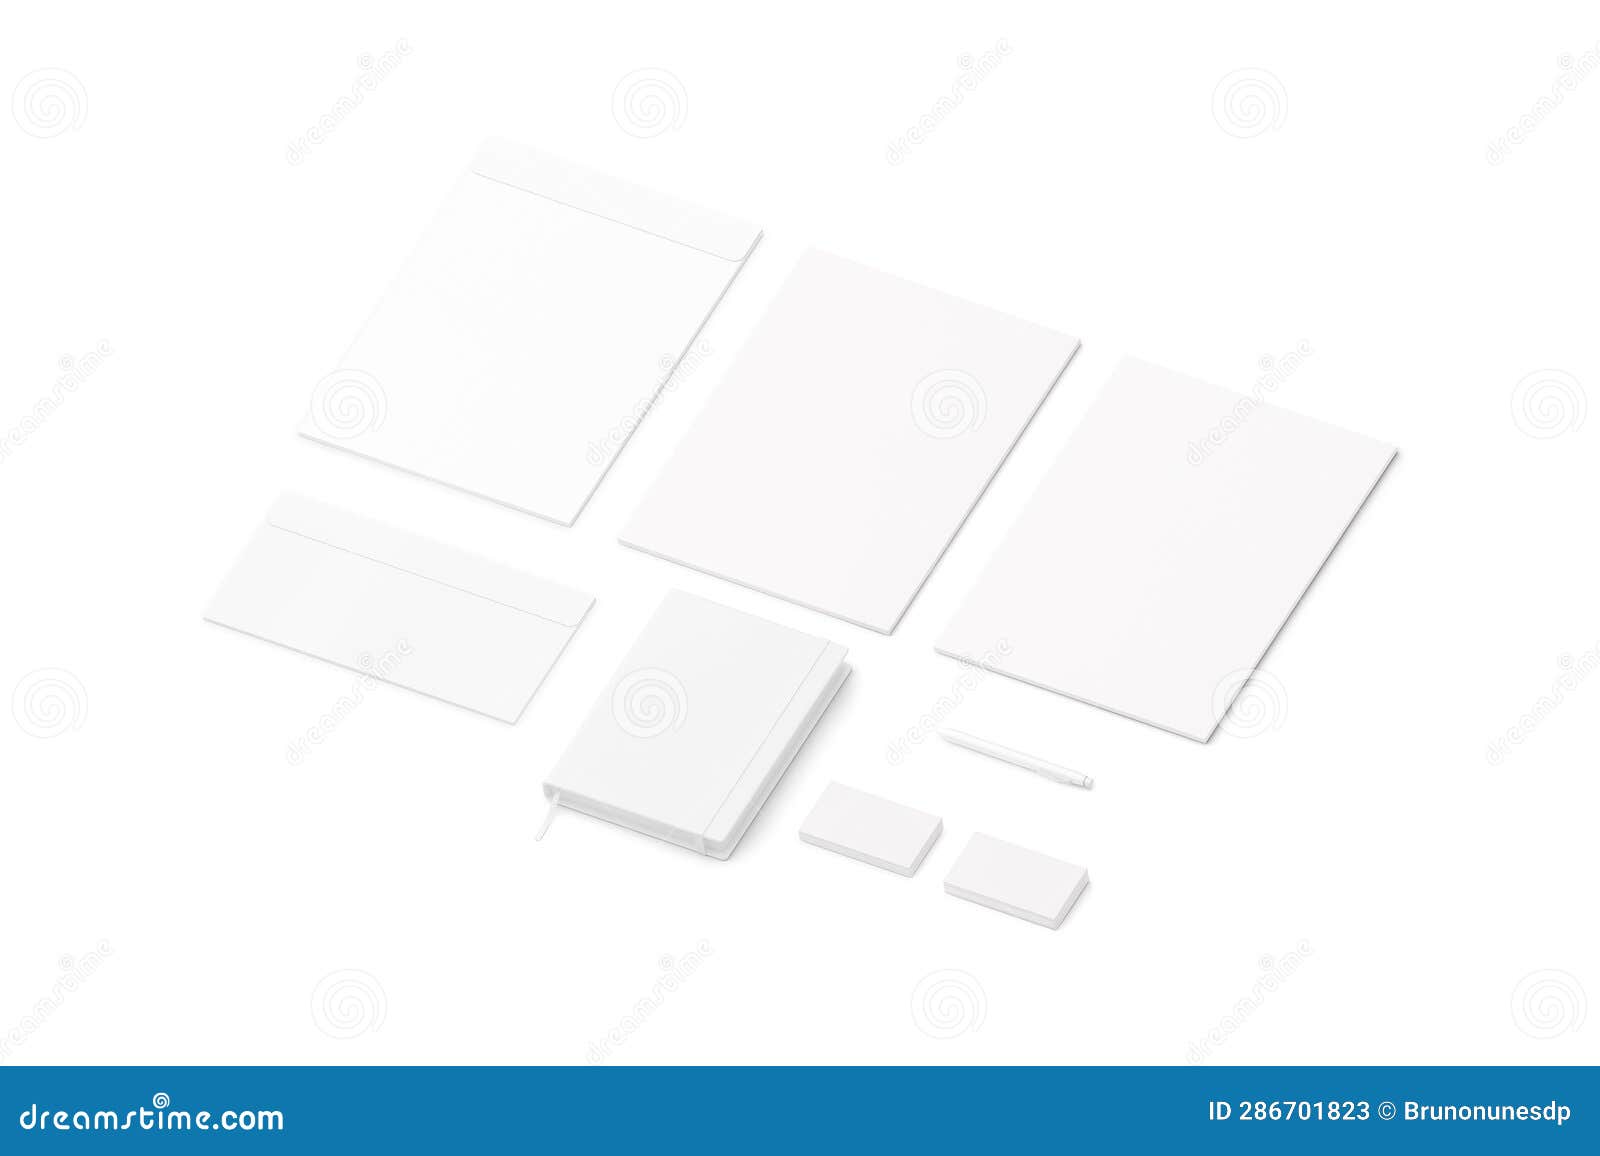 Blank White Stationary Template Isolated on a White Background Stock ...